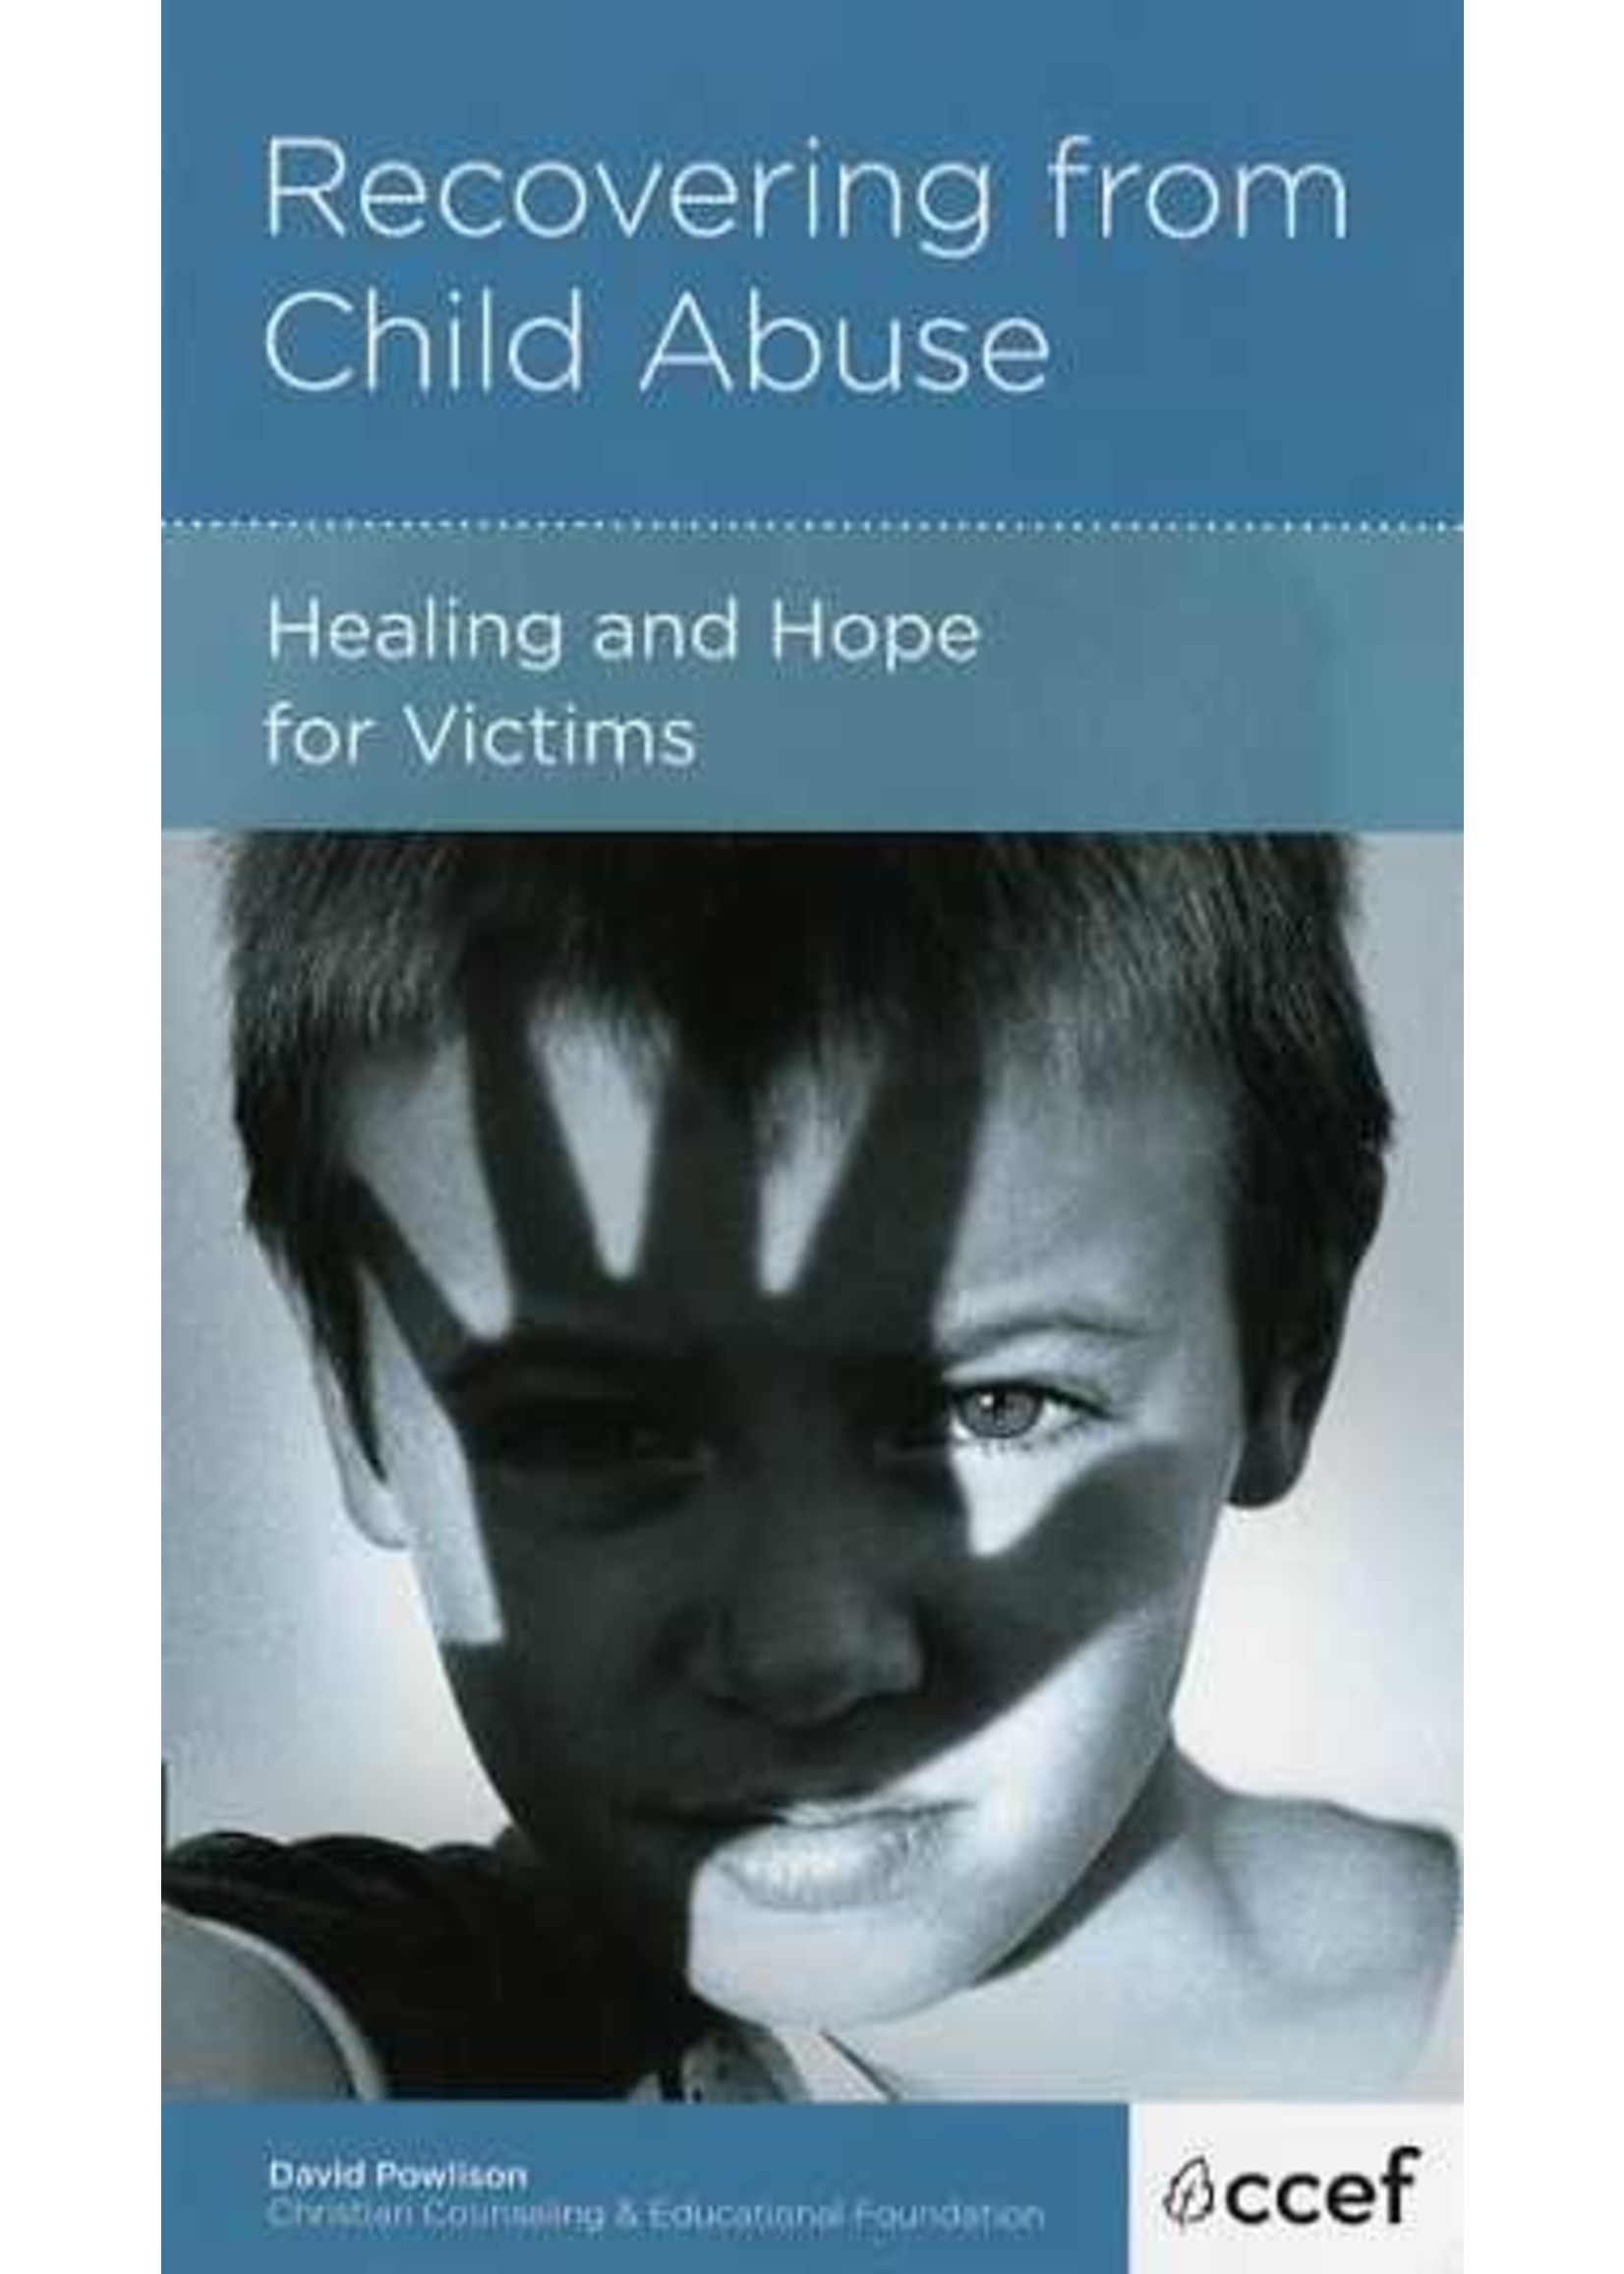 New Growth Press Recovering from Child Abuse - David Powlison